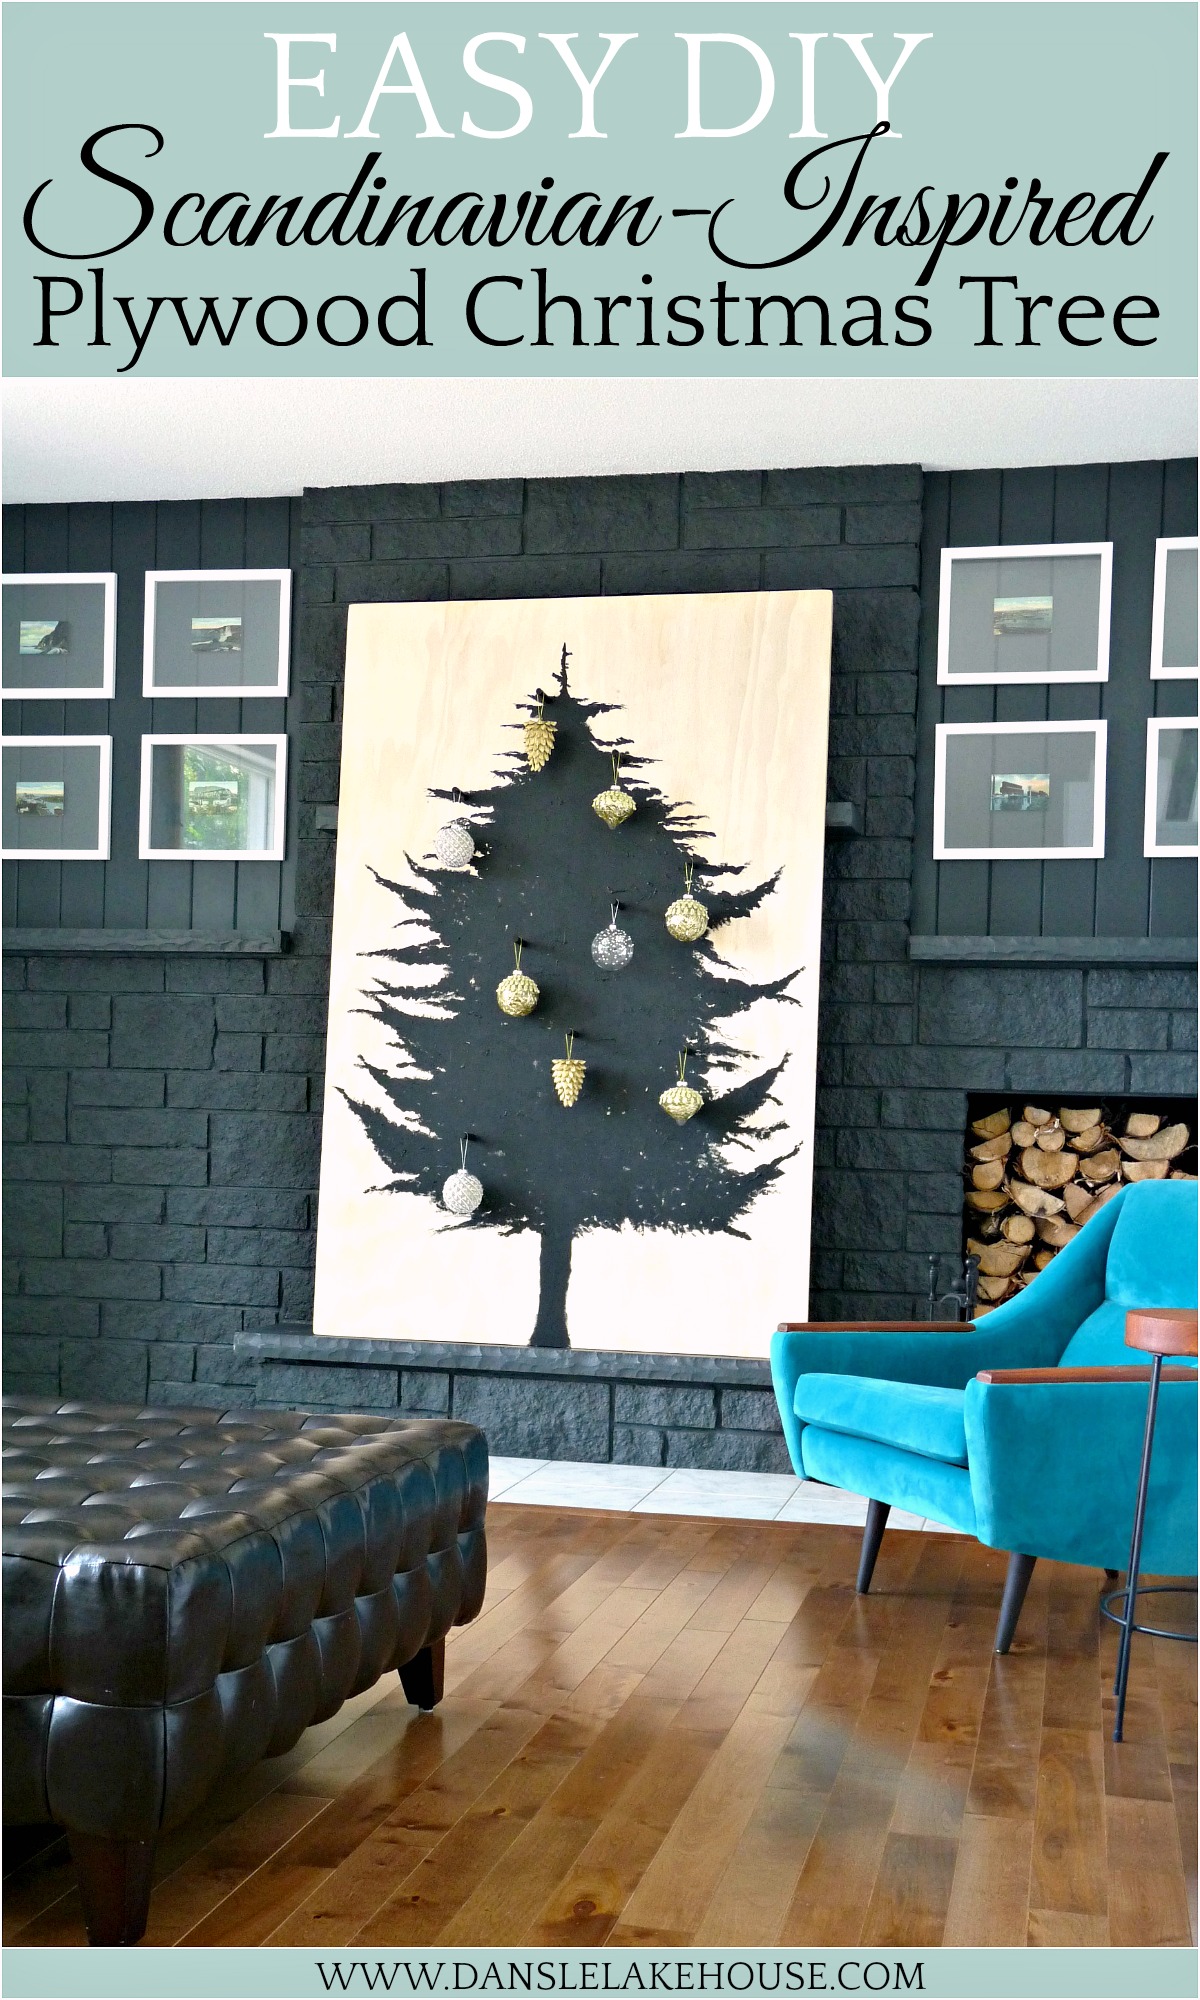 How to Build a Scandinavian-Inspired DIY Plywood Christmas Tree